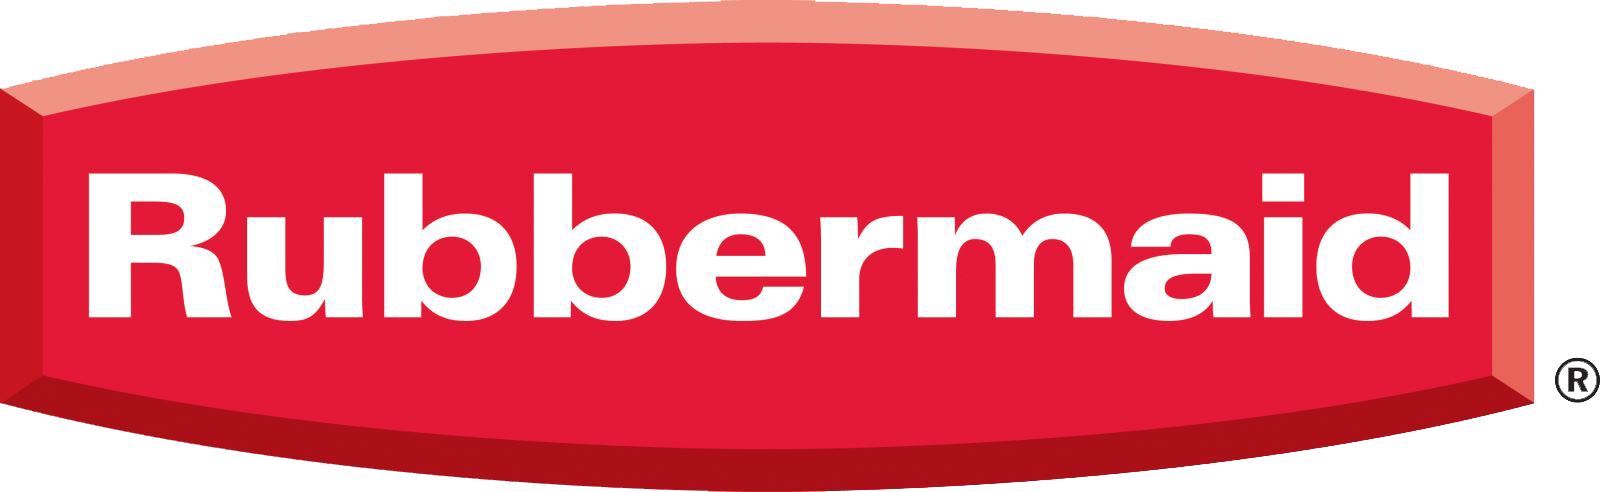 Get Involved - Rubbermaid Commercial Products Logo (1600x492)